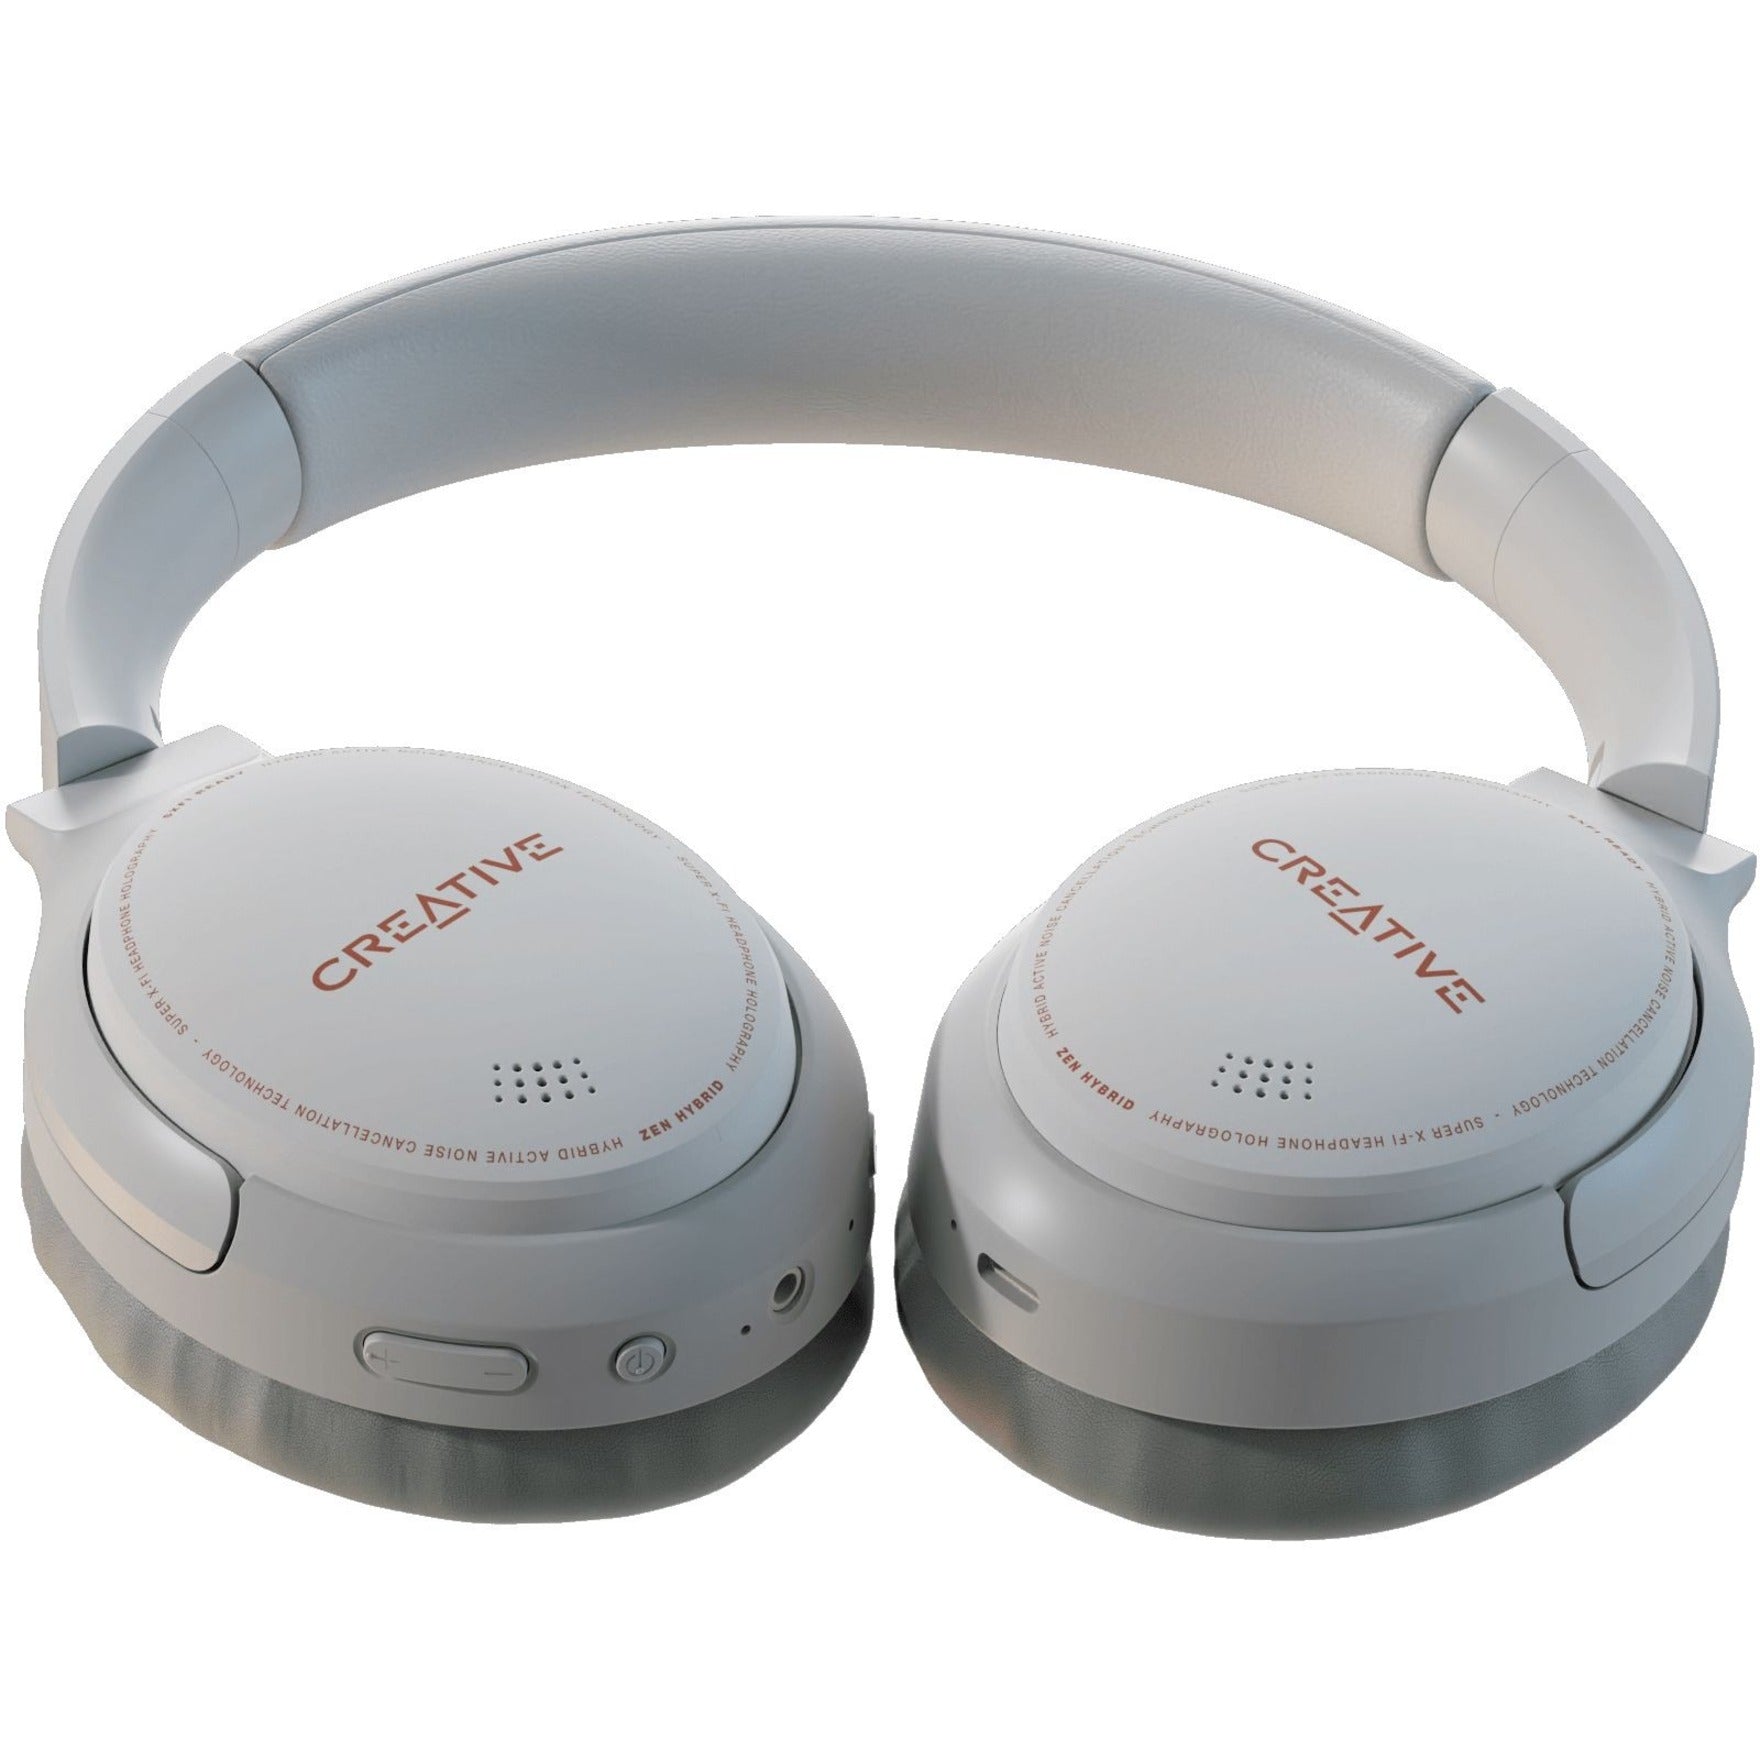 Creative 51EF1010AA000 Zen Hybrid Headset, Over-the-ear Bluetooth 5.0 Stereo Headphones with Noise Cancelling